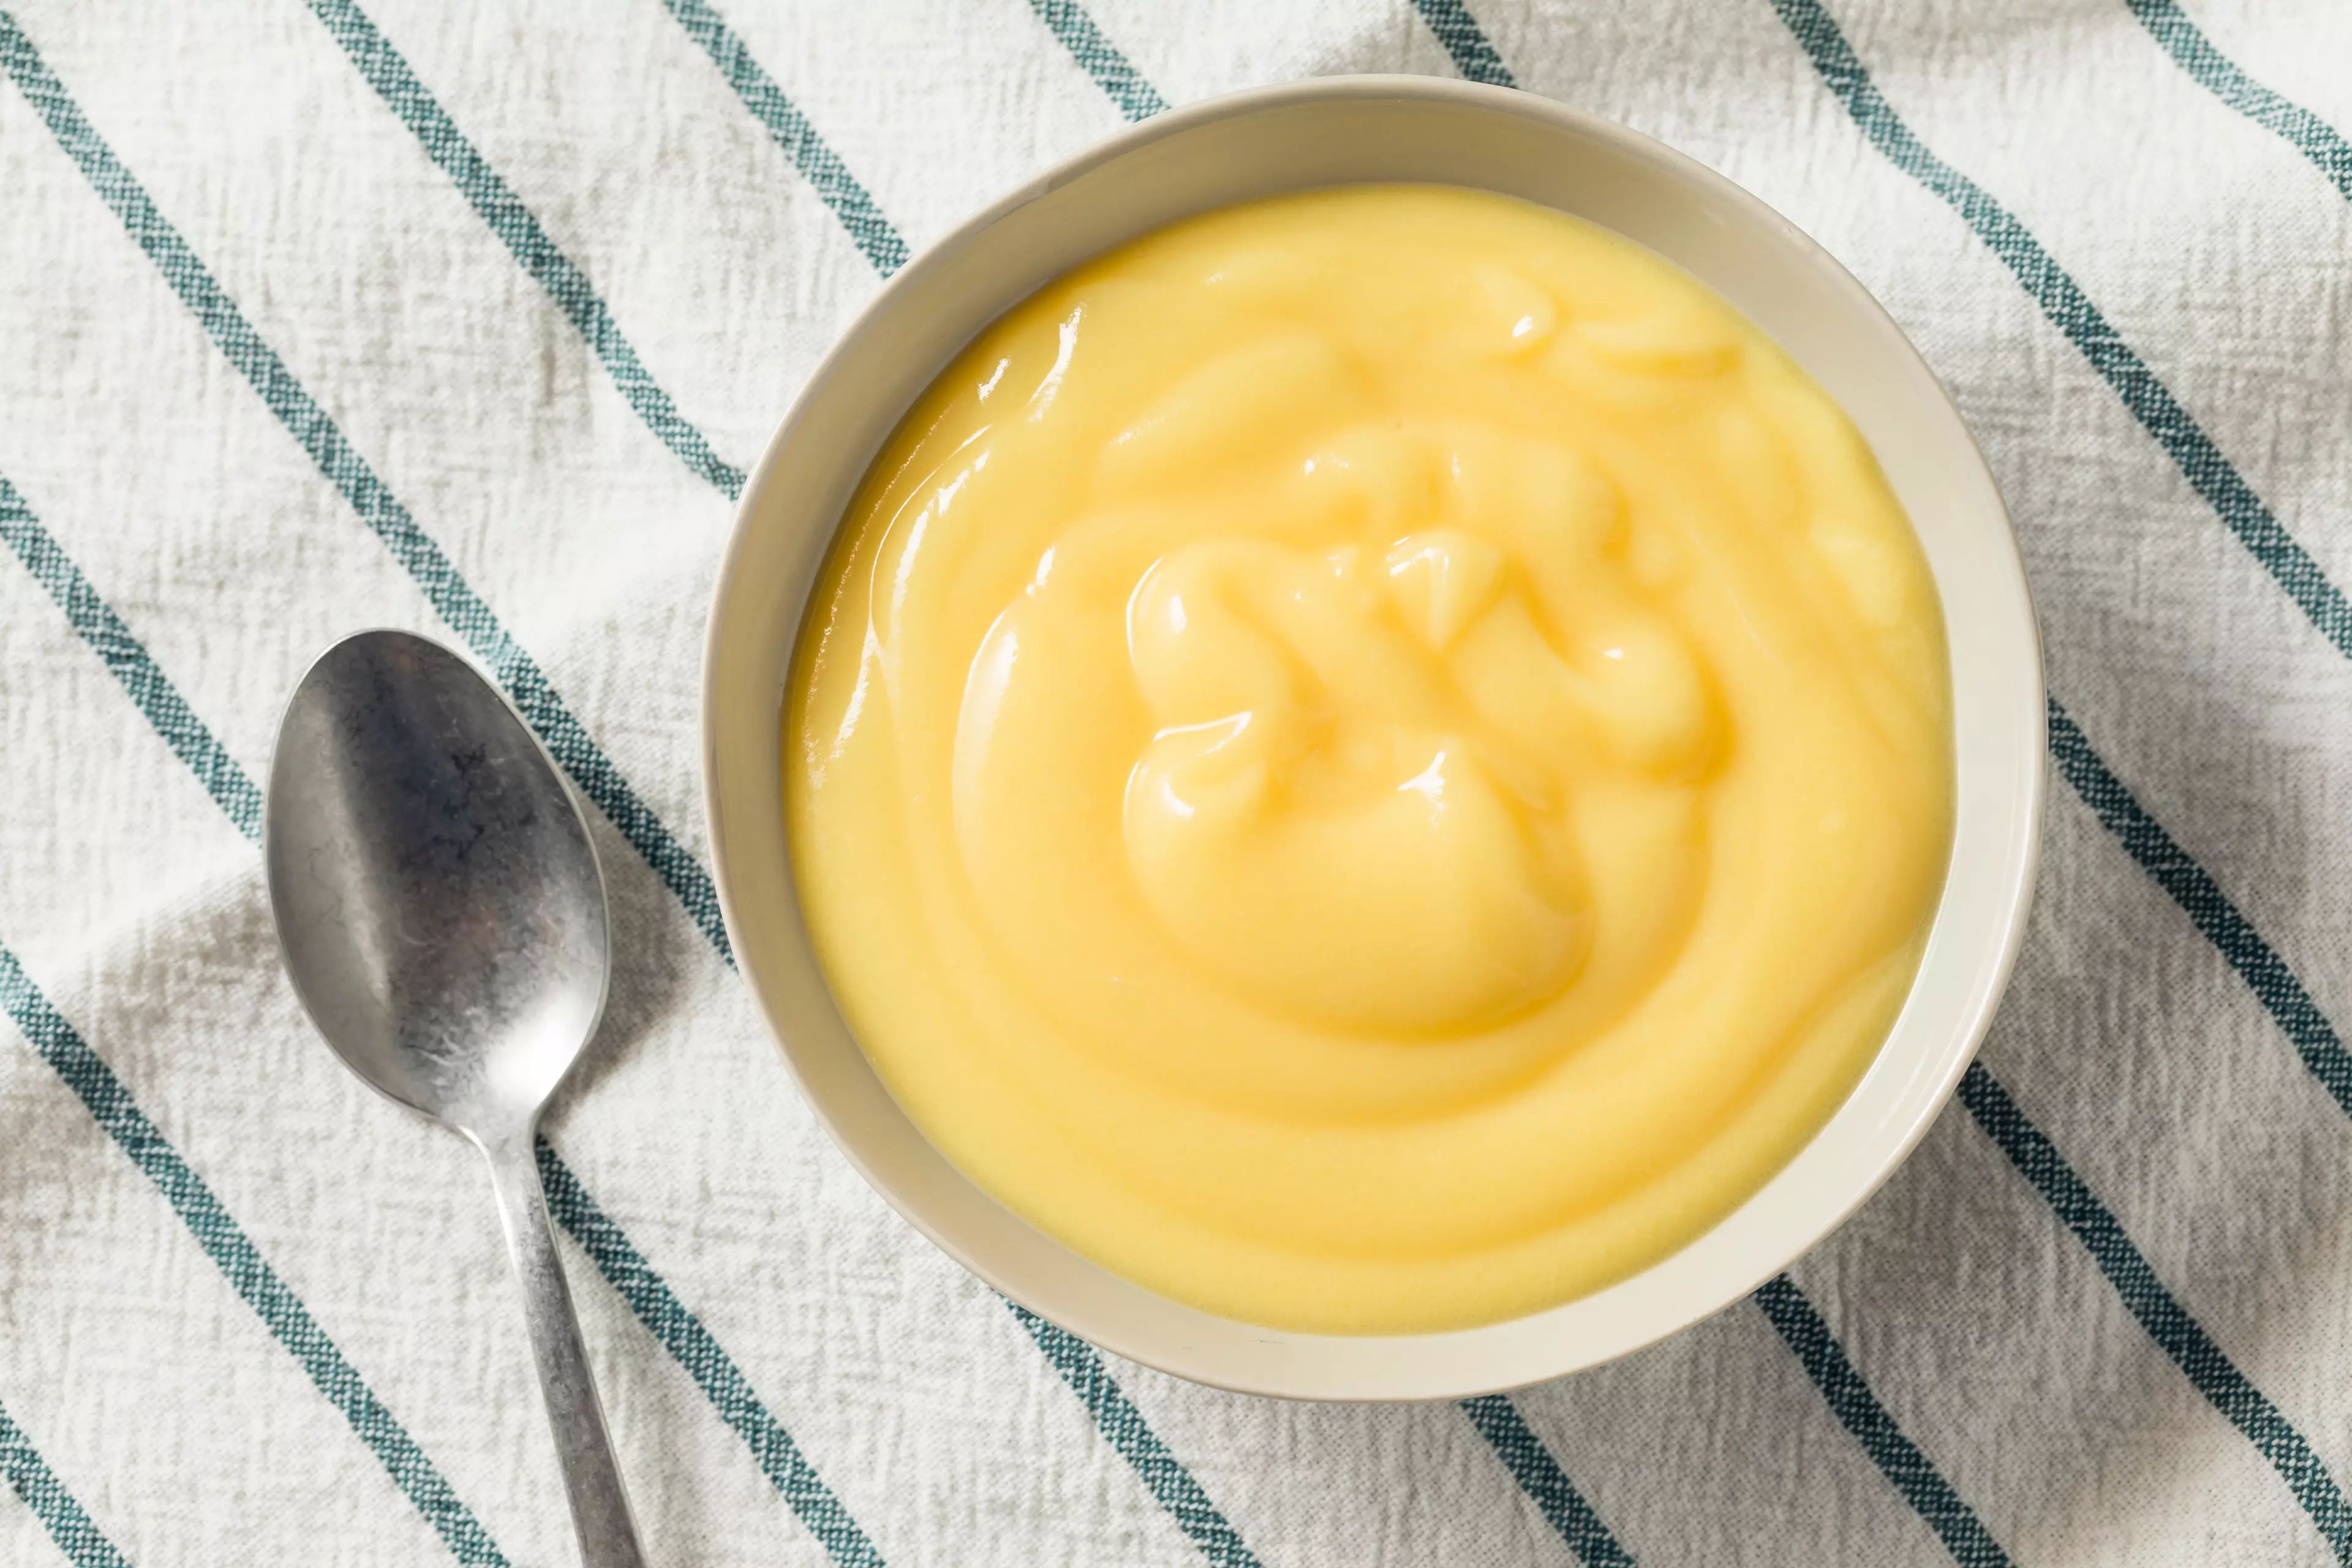 Have you ever wondered what it's like to bathe in custard scented lube before? Neither have we (